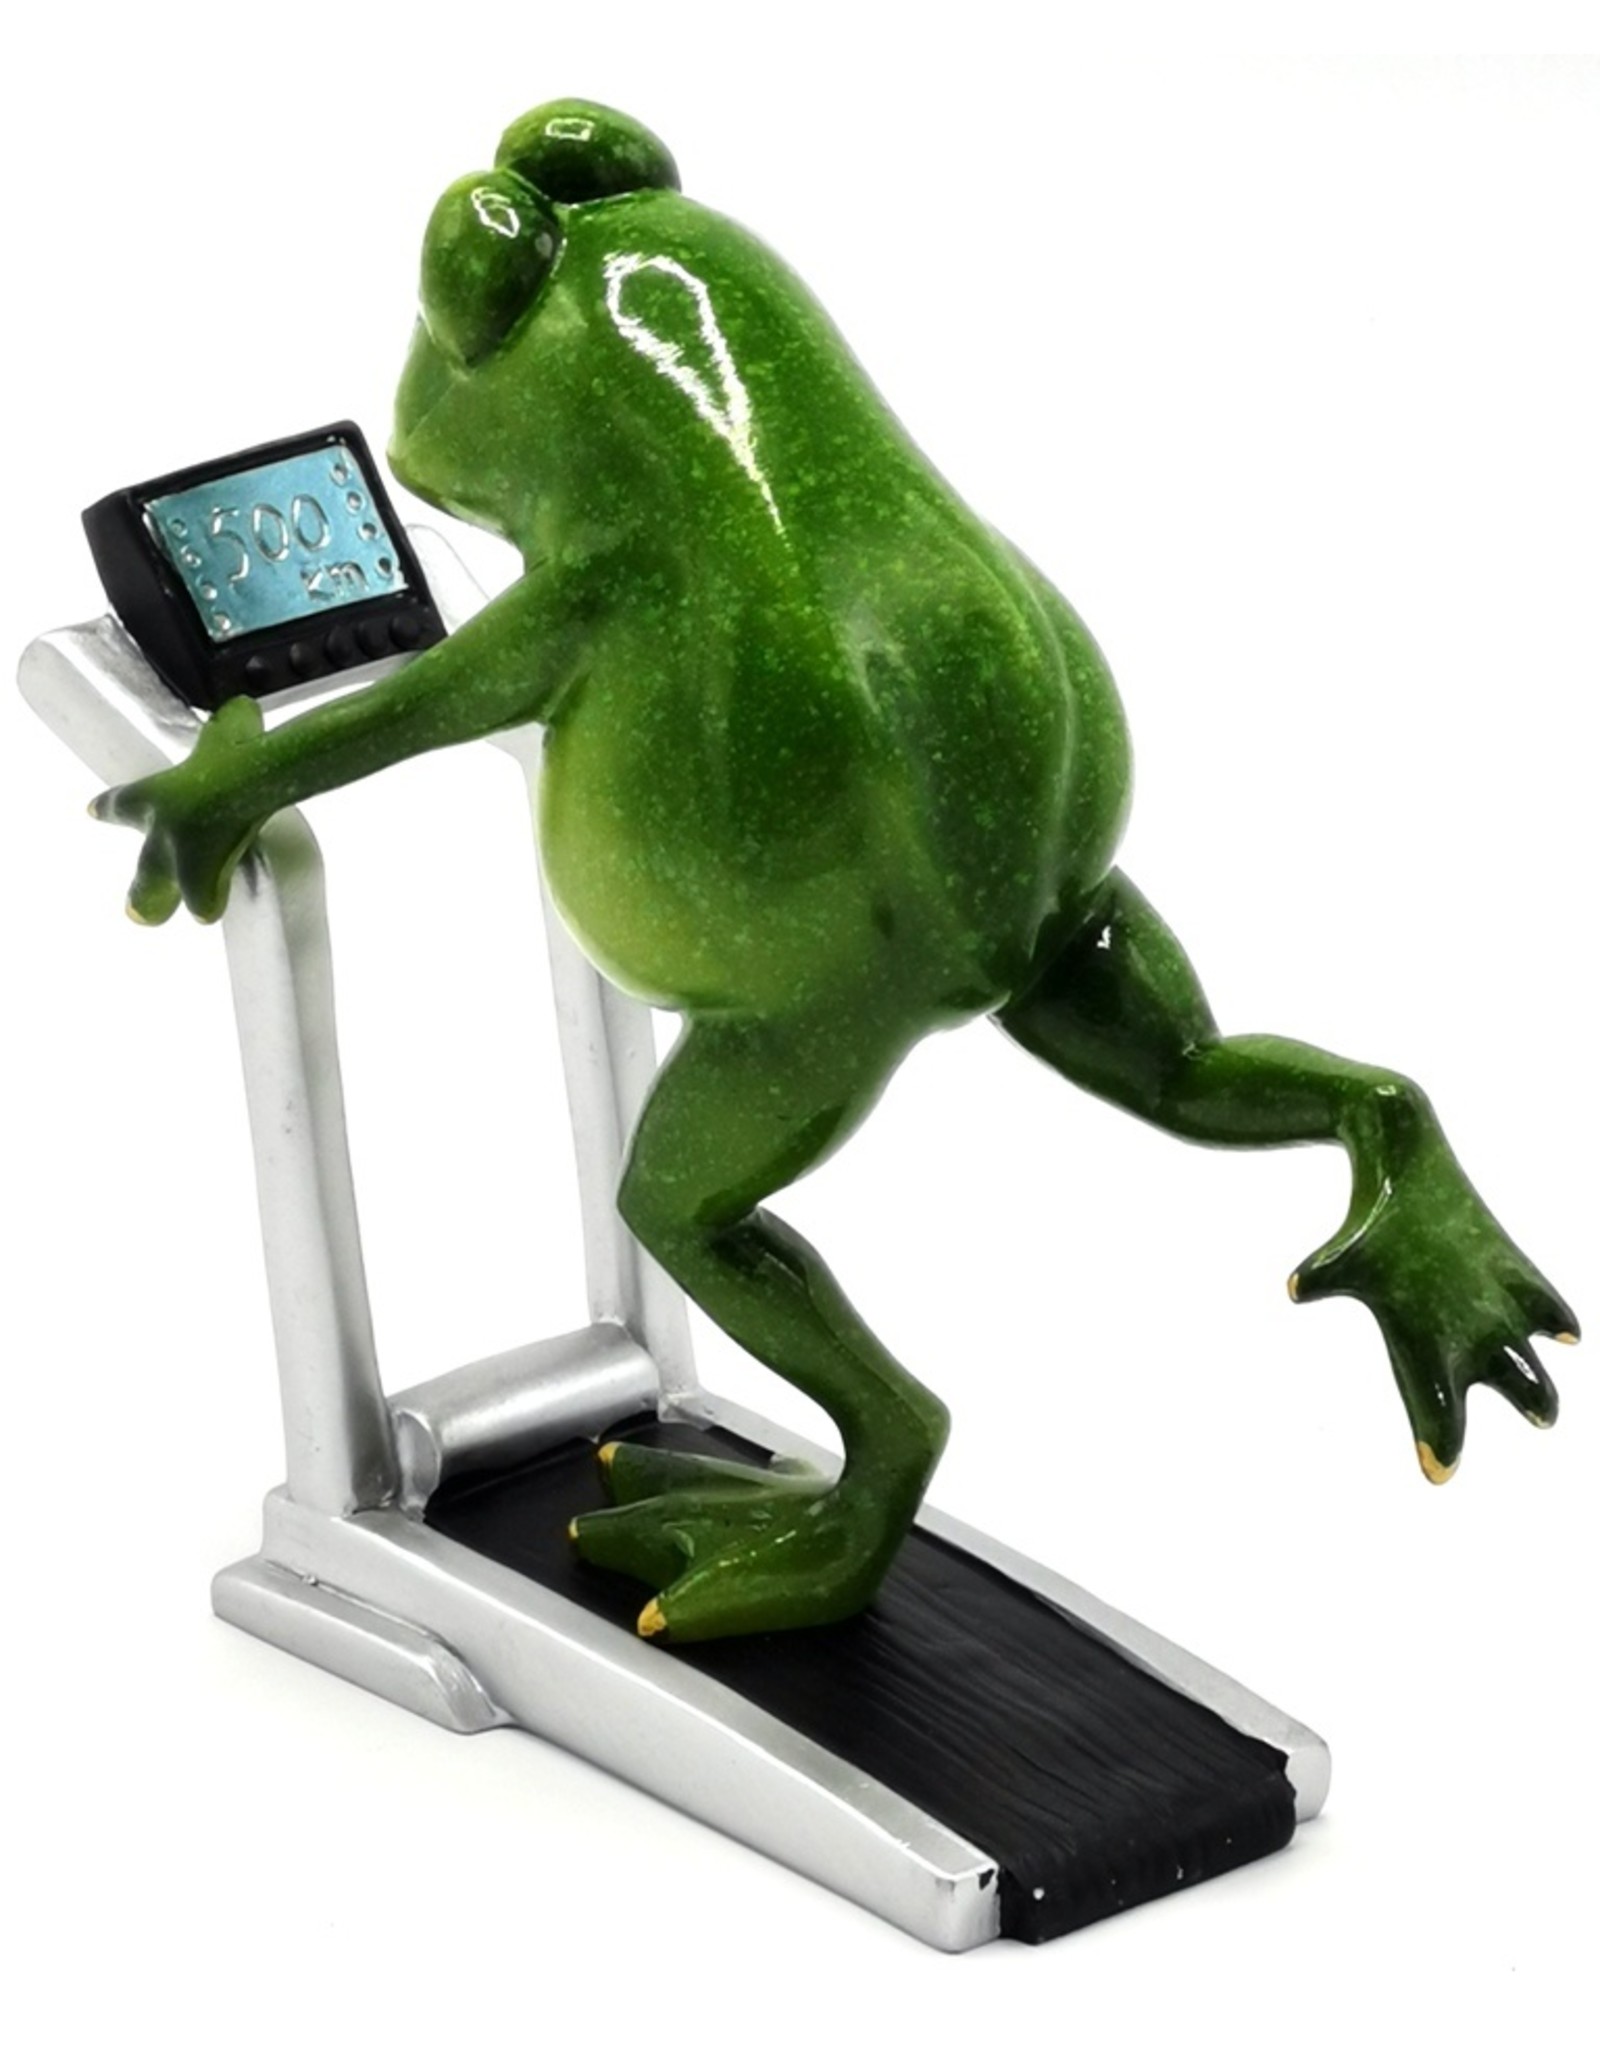 Goldbach Giftware Figurines Collectables - Frog on the Treadmill figurine - 18cm, polyresin